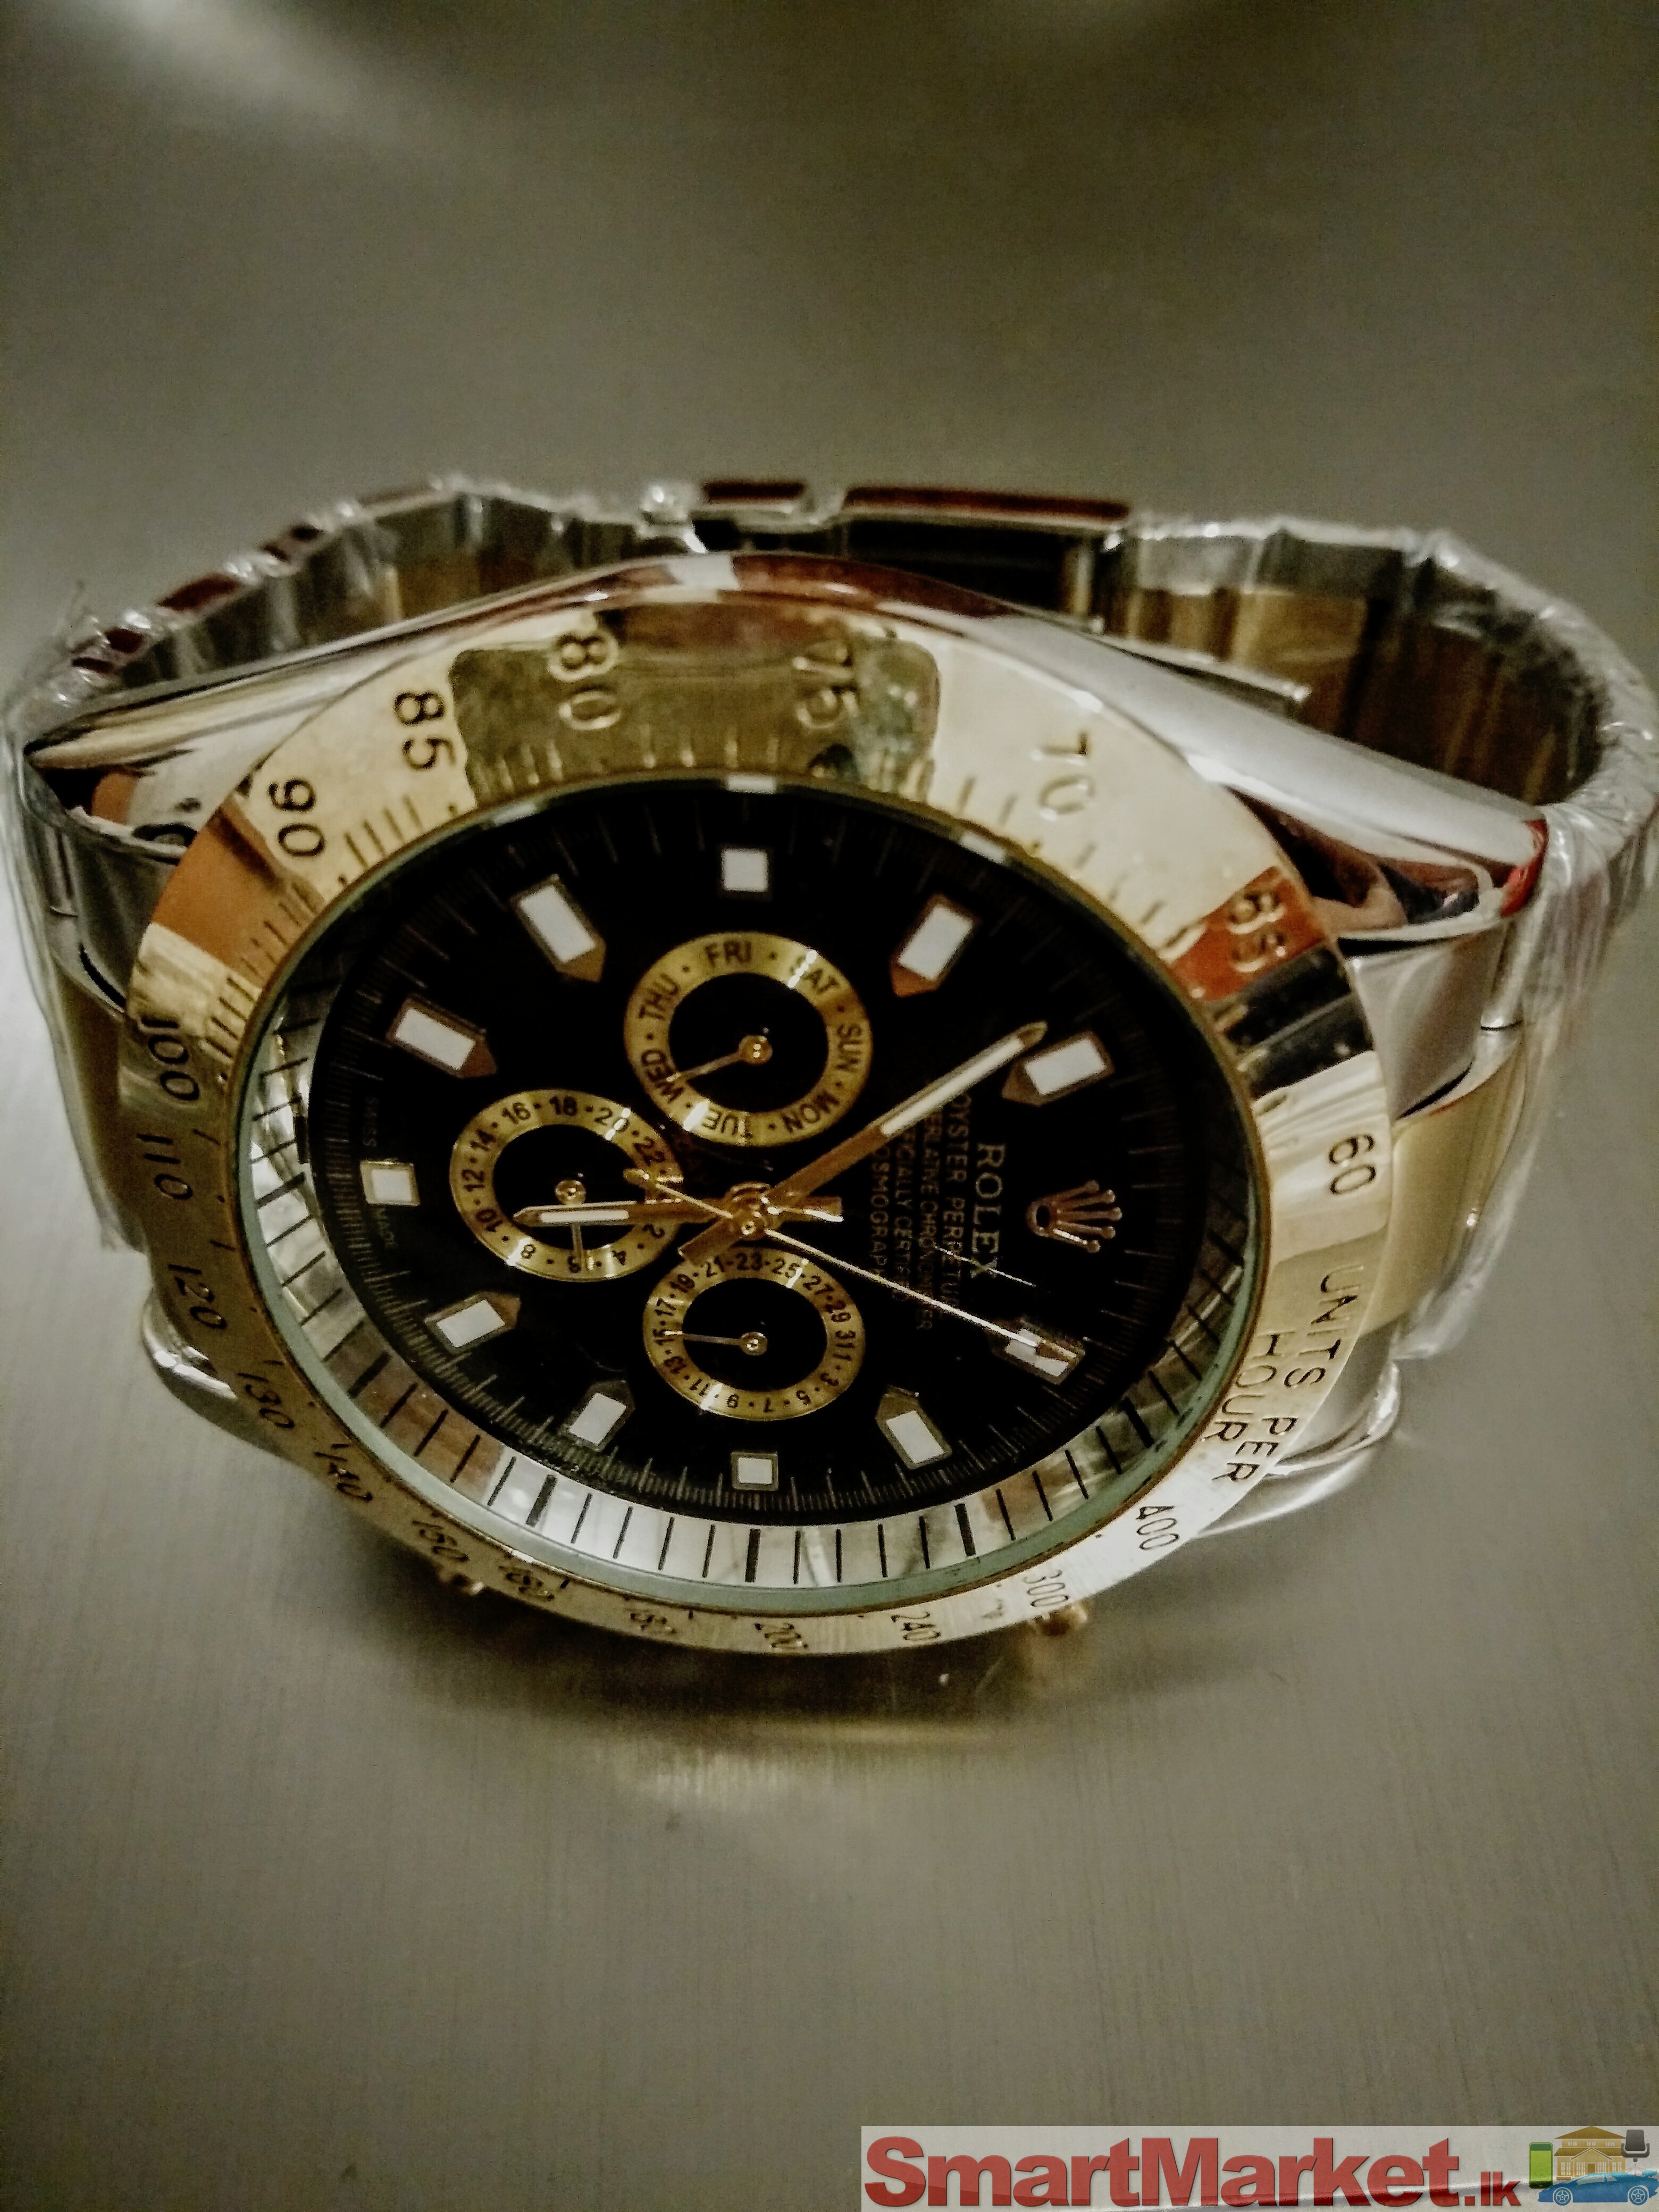 Rolex chronograph in black & gold steel finish AAA